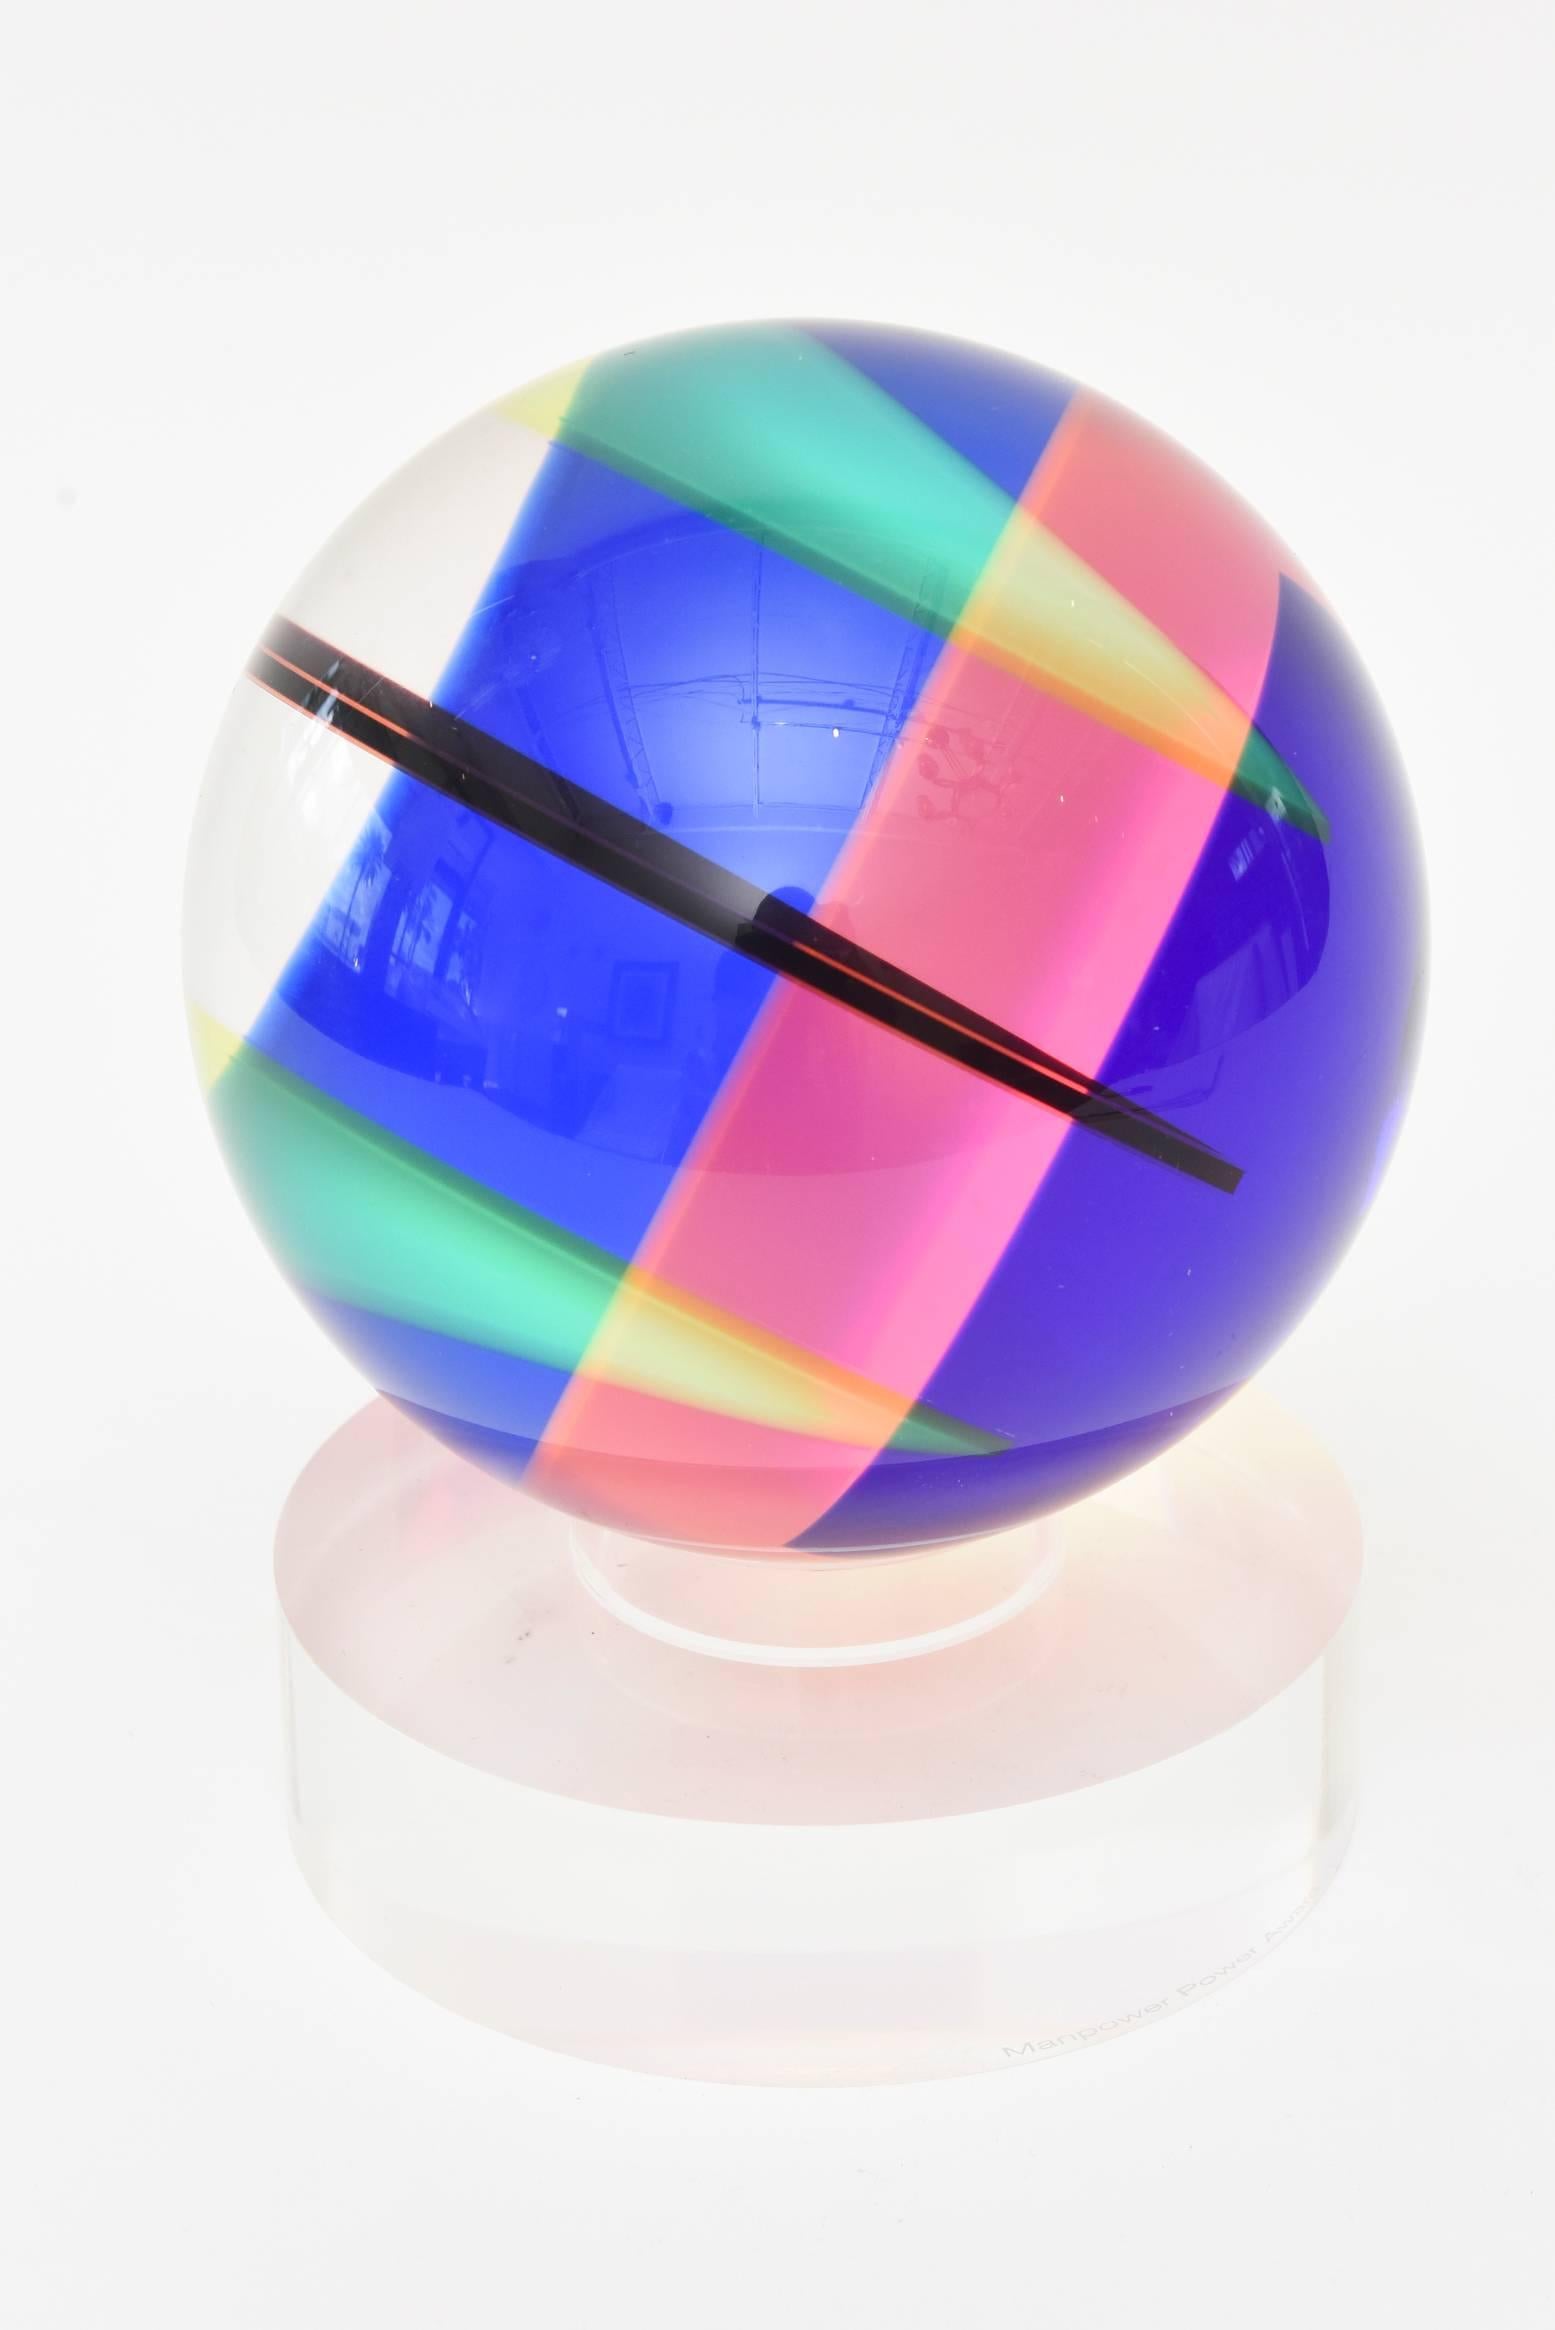 This fabulous signed Vasa Mihich laminated Lucite sphere ball abstract sculpture is dated 2006. It has intersecting planes of colored Lucite that change with the play of light and turn. Each way there are different planes of color and abstractions.